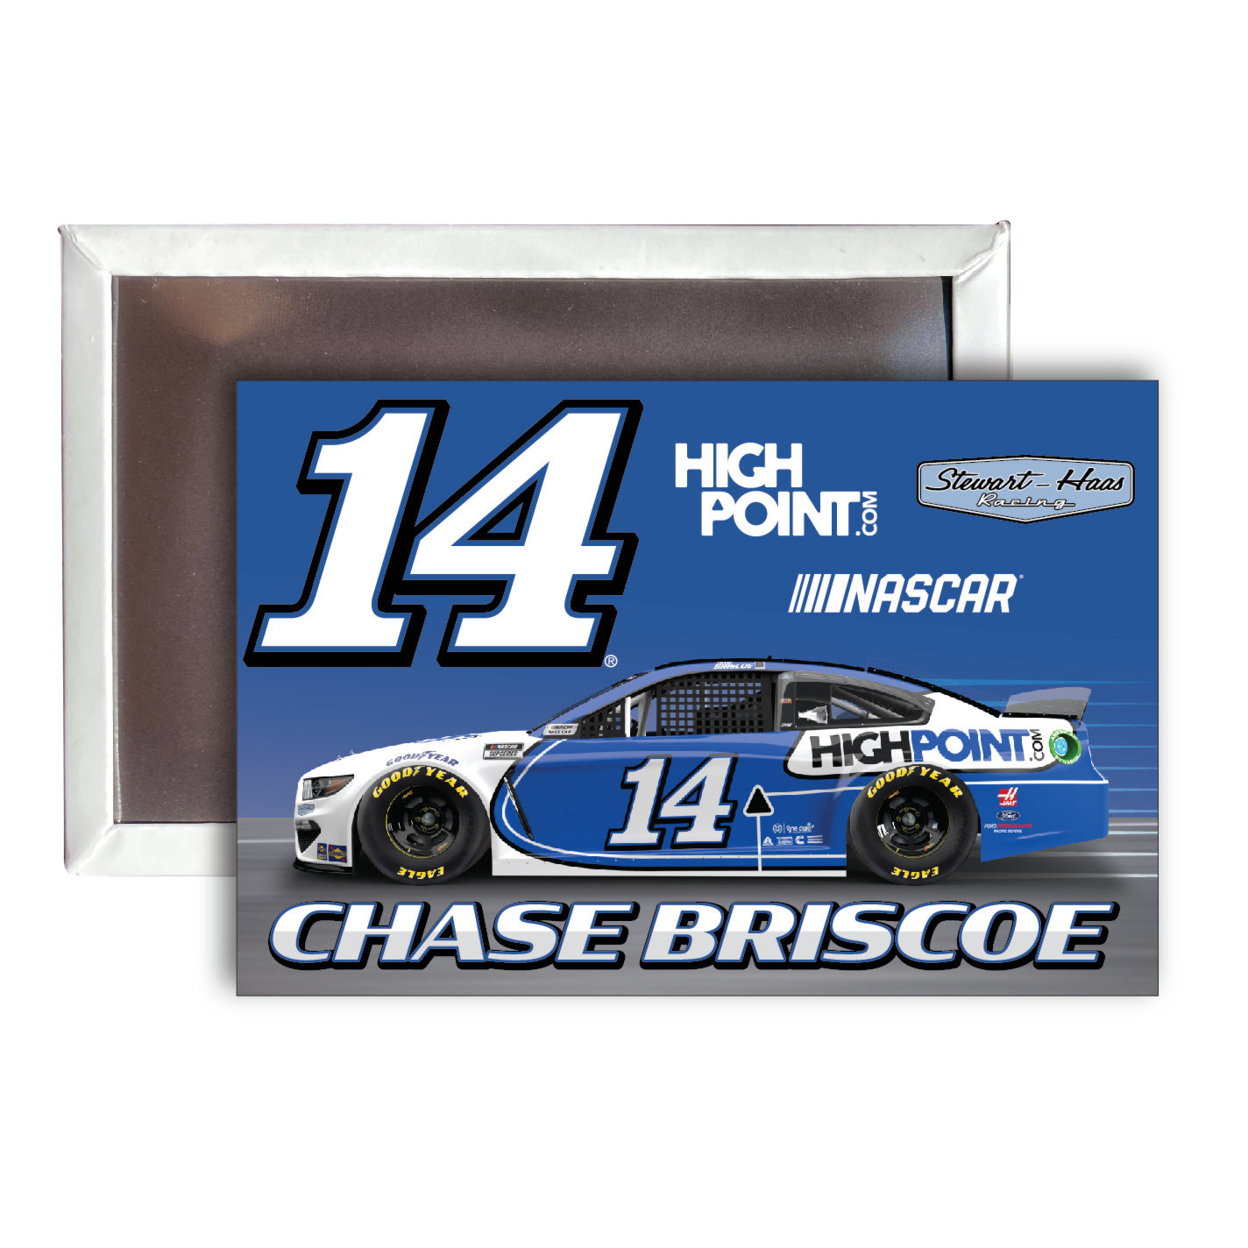 Chase Briscoe # 14 Nascar 2x3-Inch Fridge Magnet New For 2021